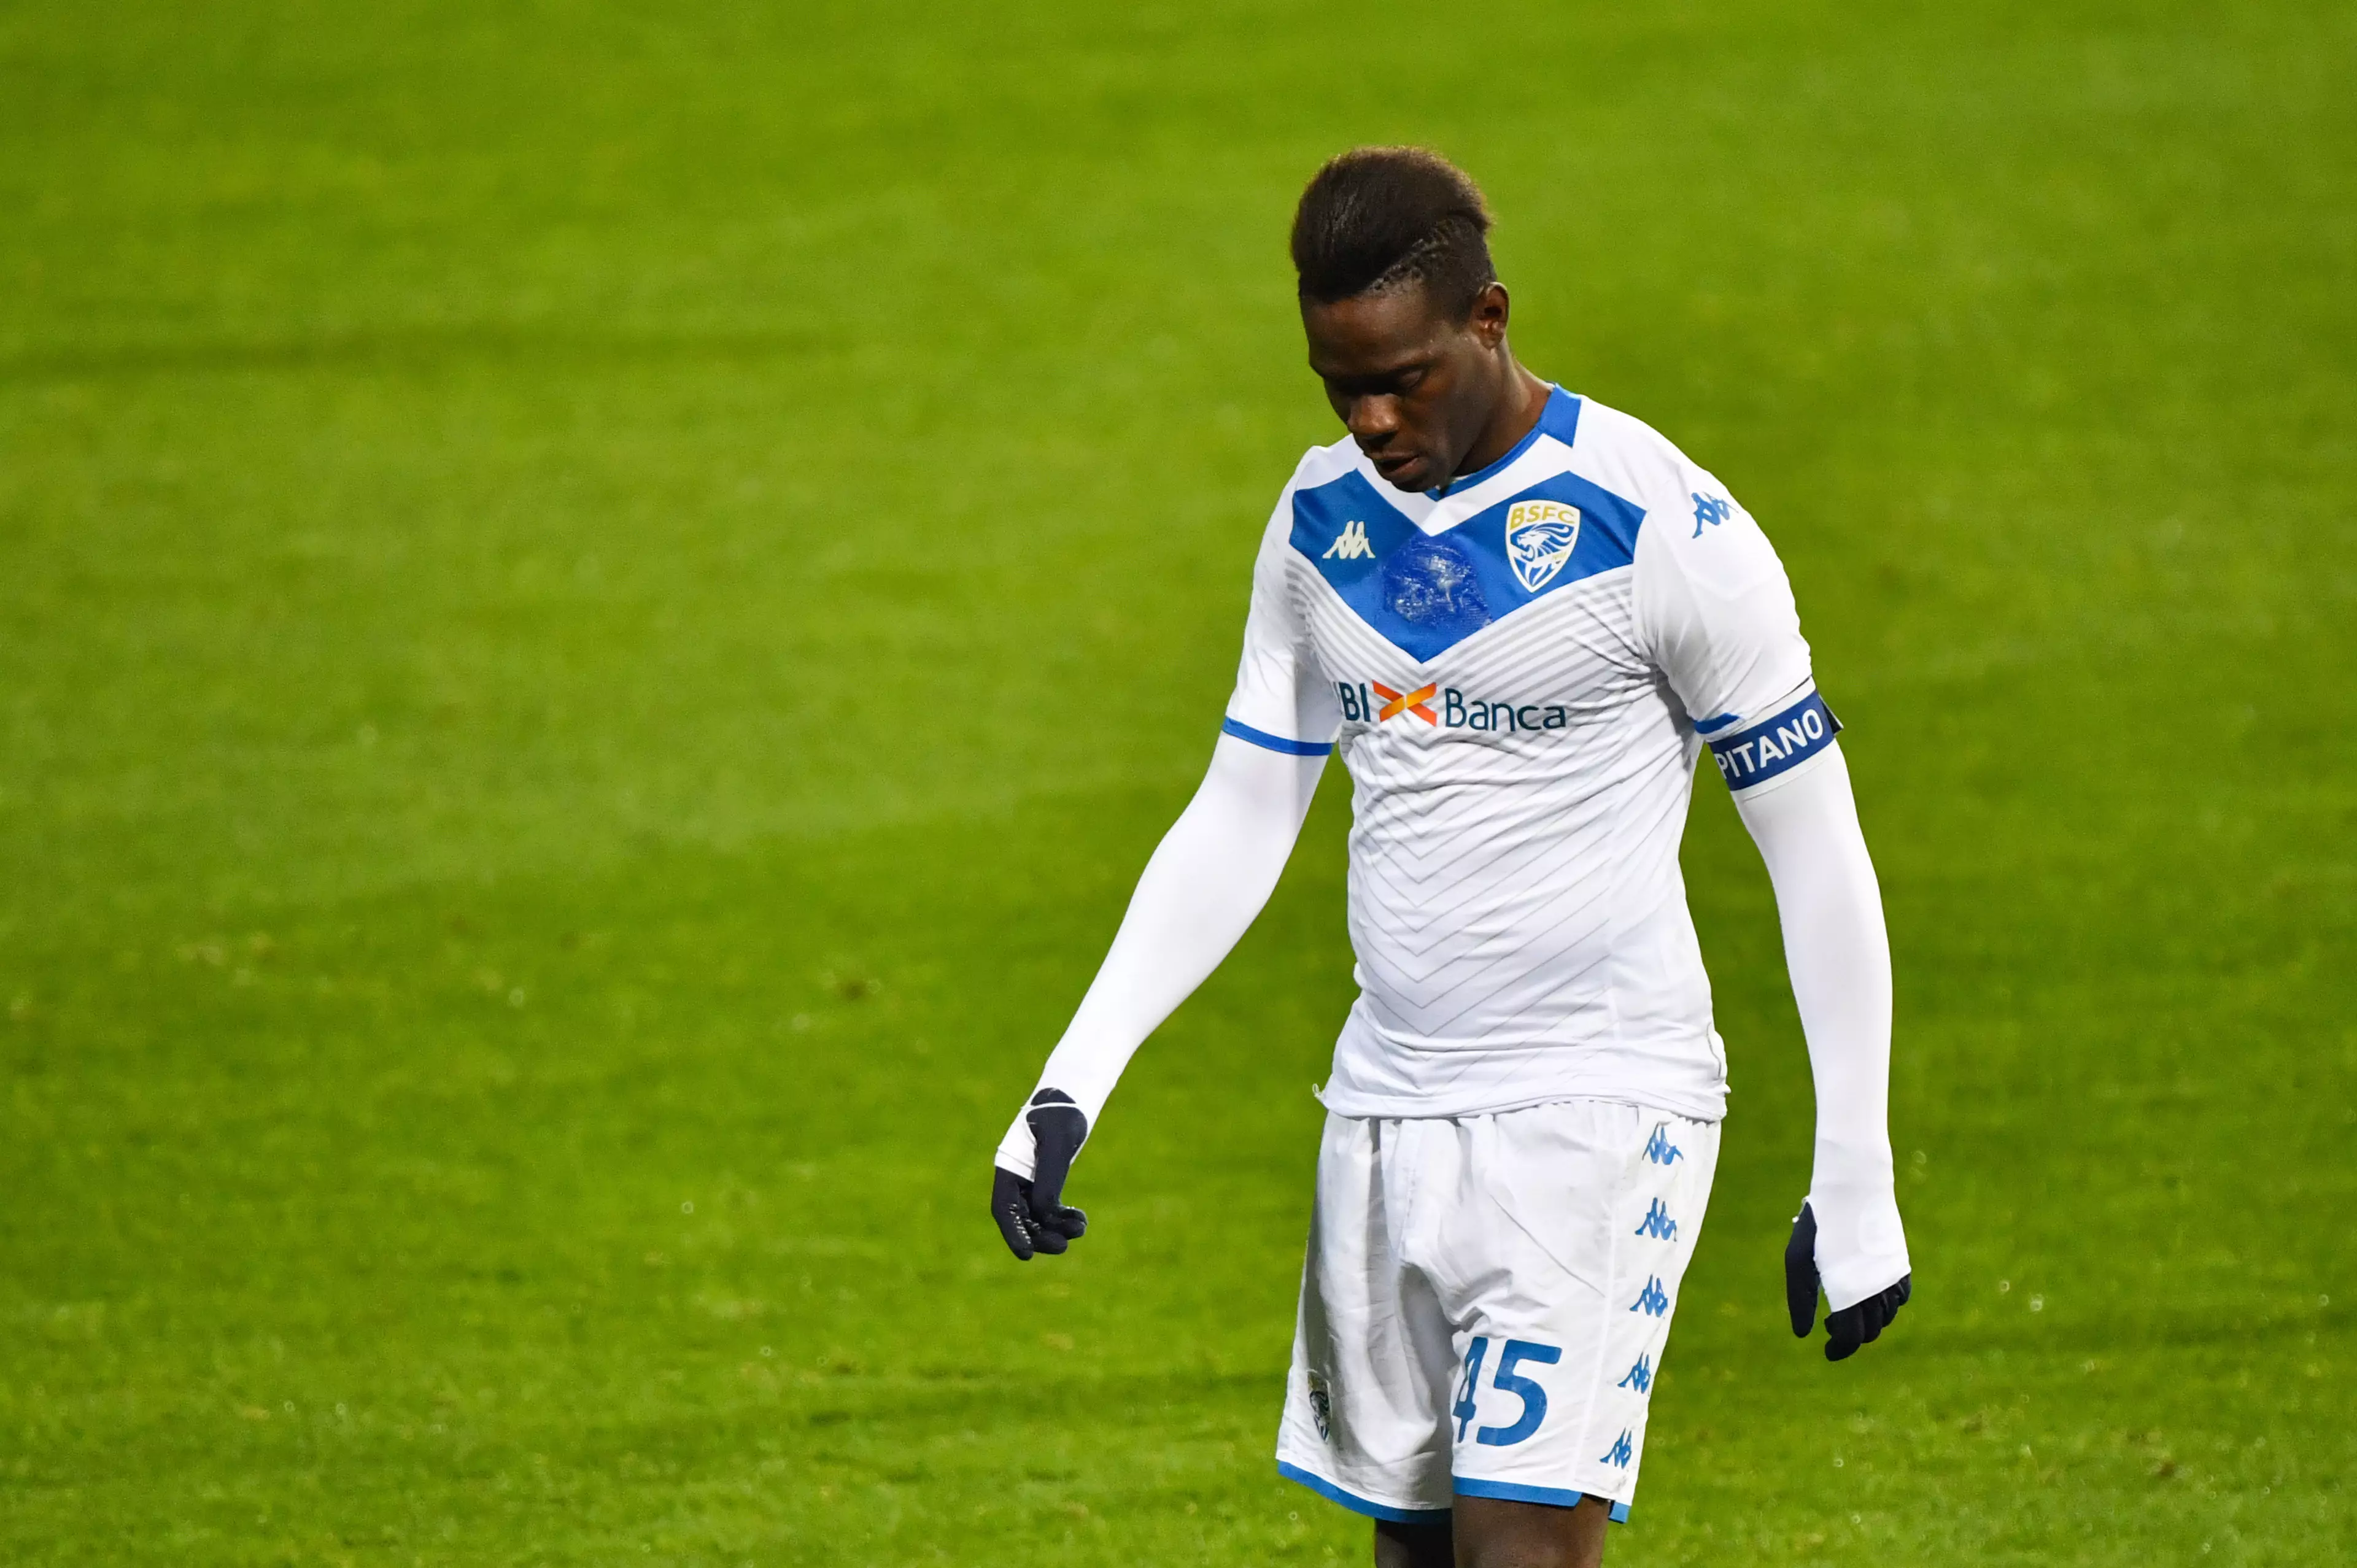 Balotelli hasn't been able to recapture his form for Brescia. Image: PA Images